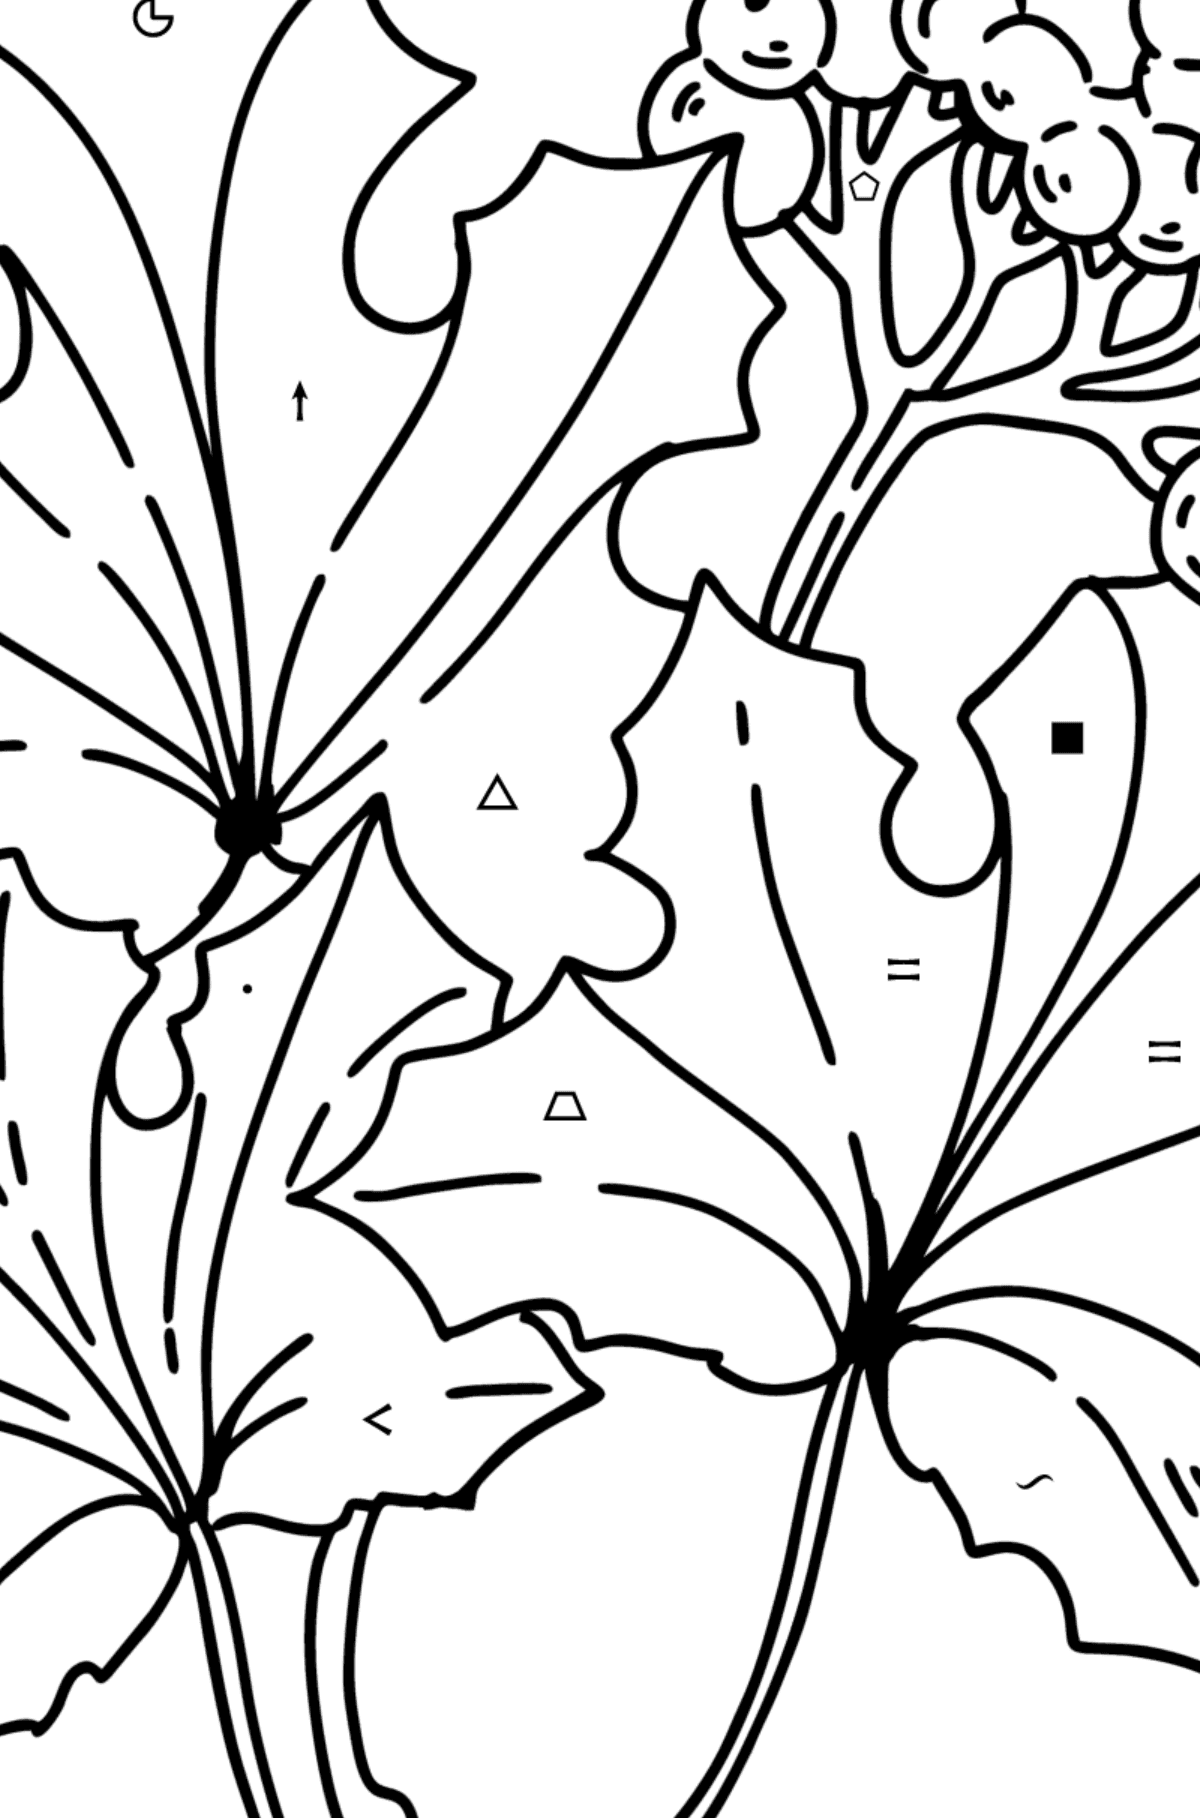 Coloring page - Maple Leaves and Elderberries - Coloring by Symbols and Geometric Shapes for Kids